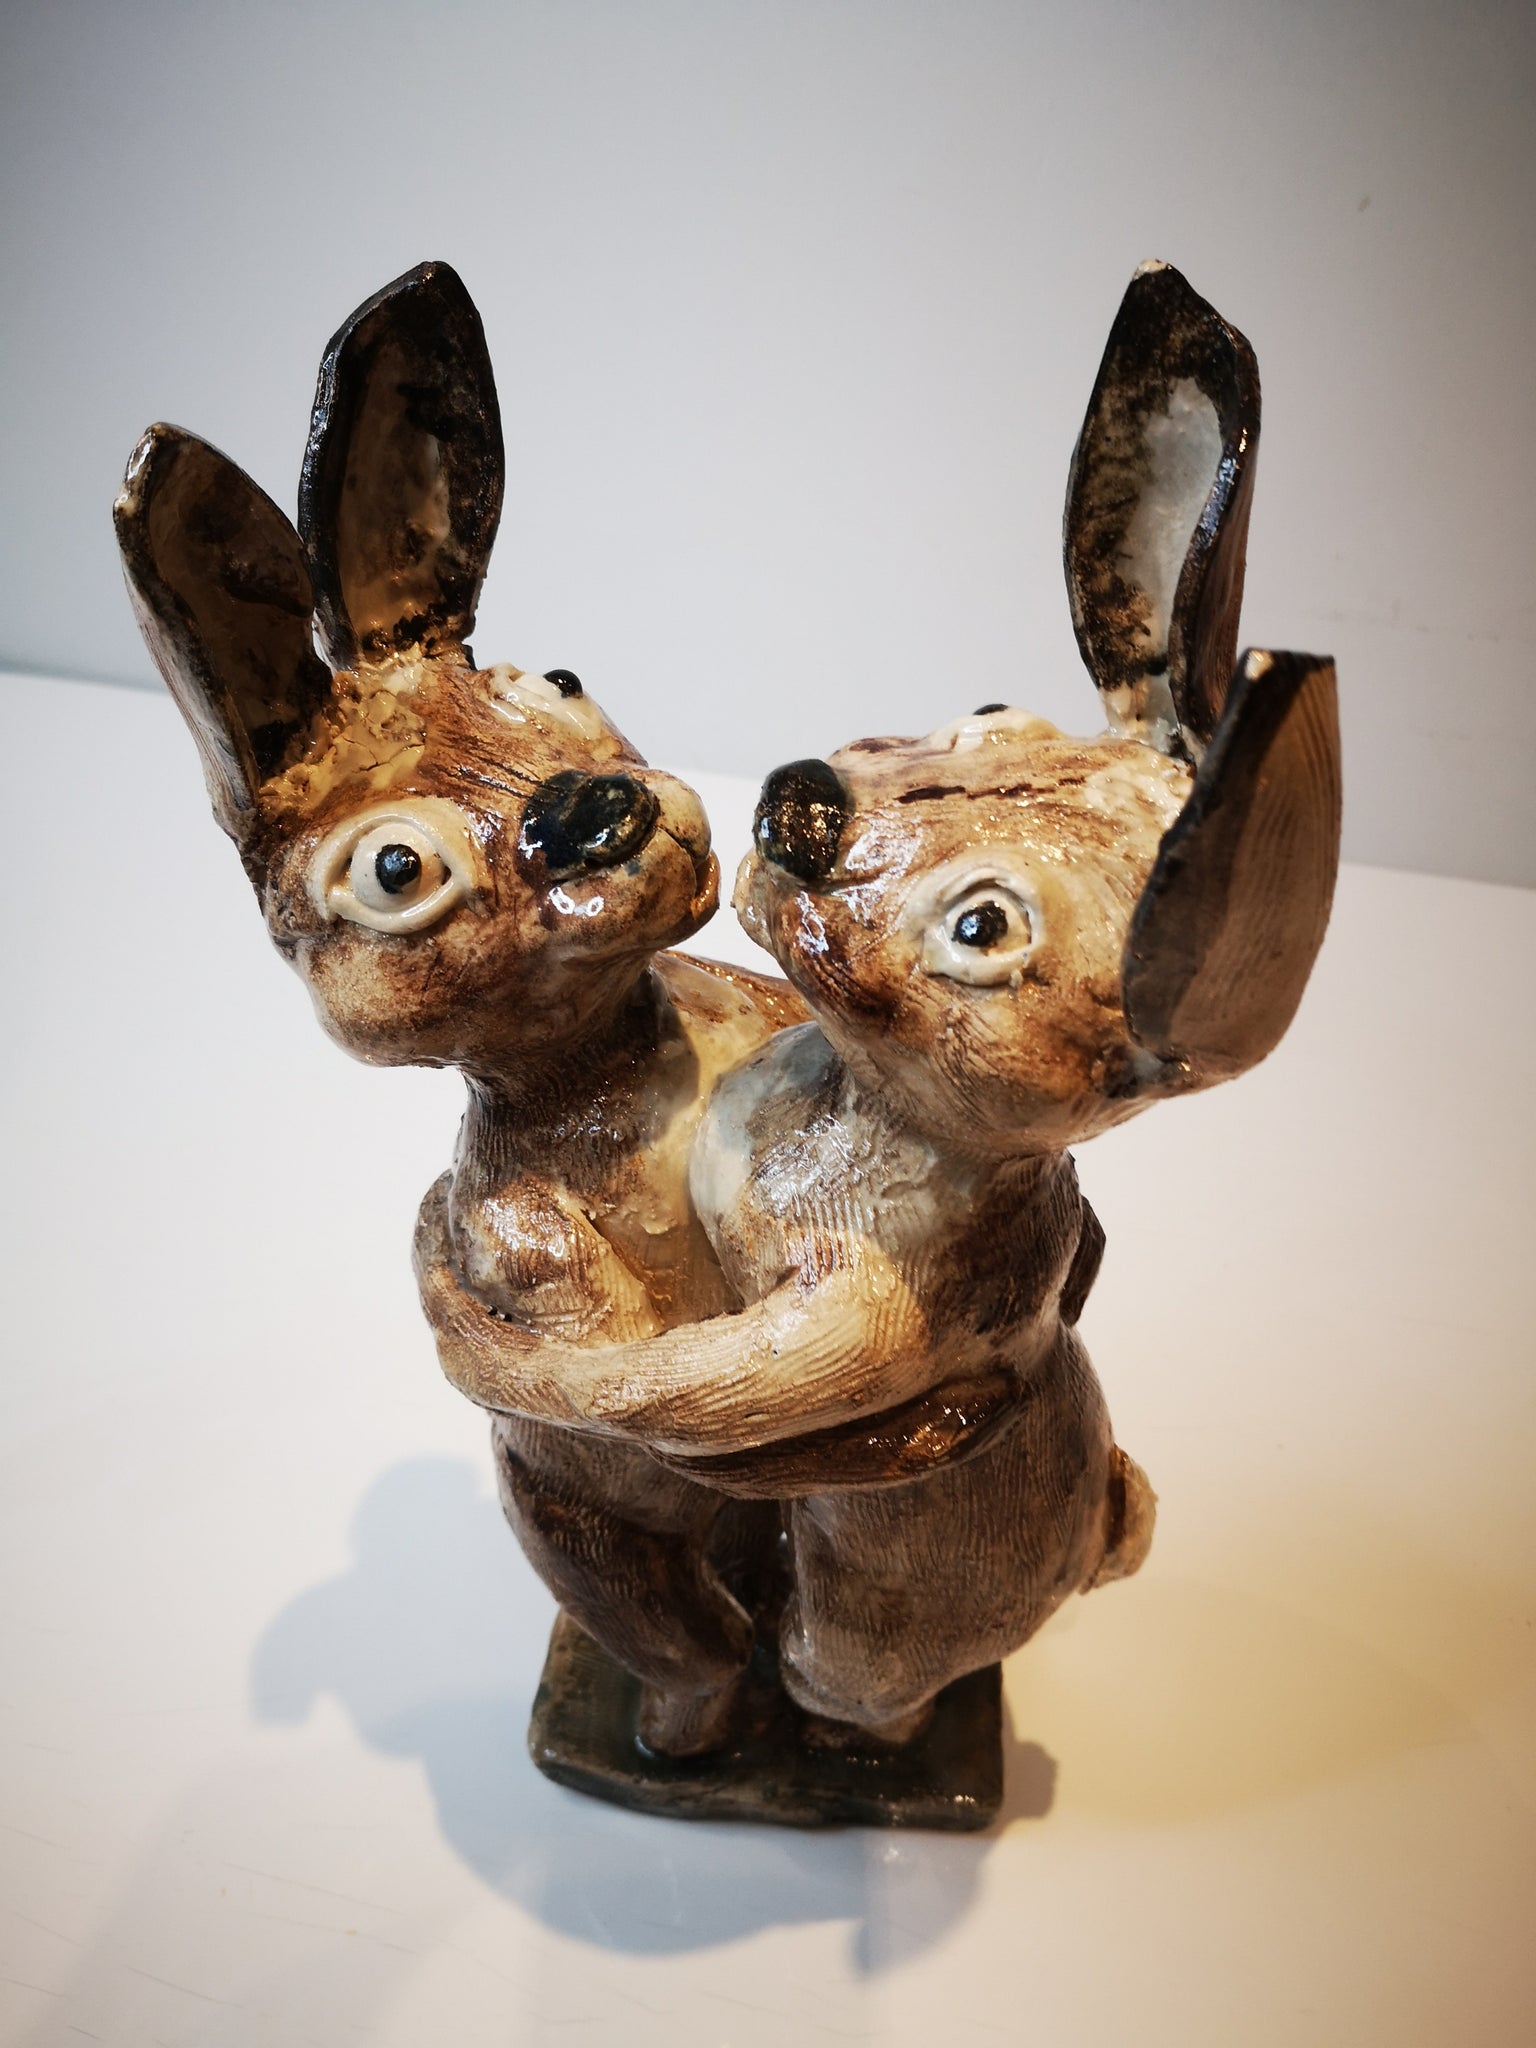 Loving Hares, a ceramic sculpture of two hares hugging each other by ceramic artist Vivien Phelan